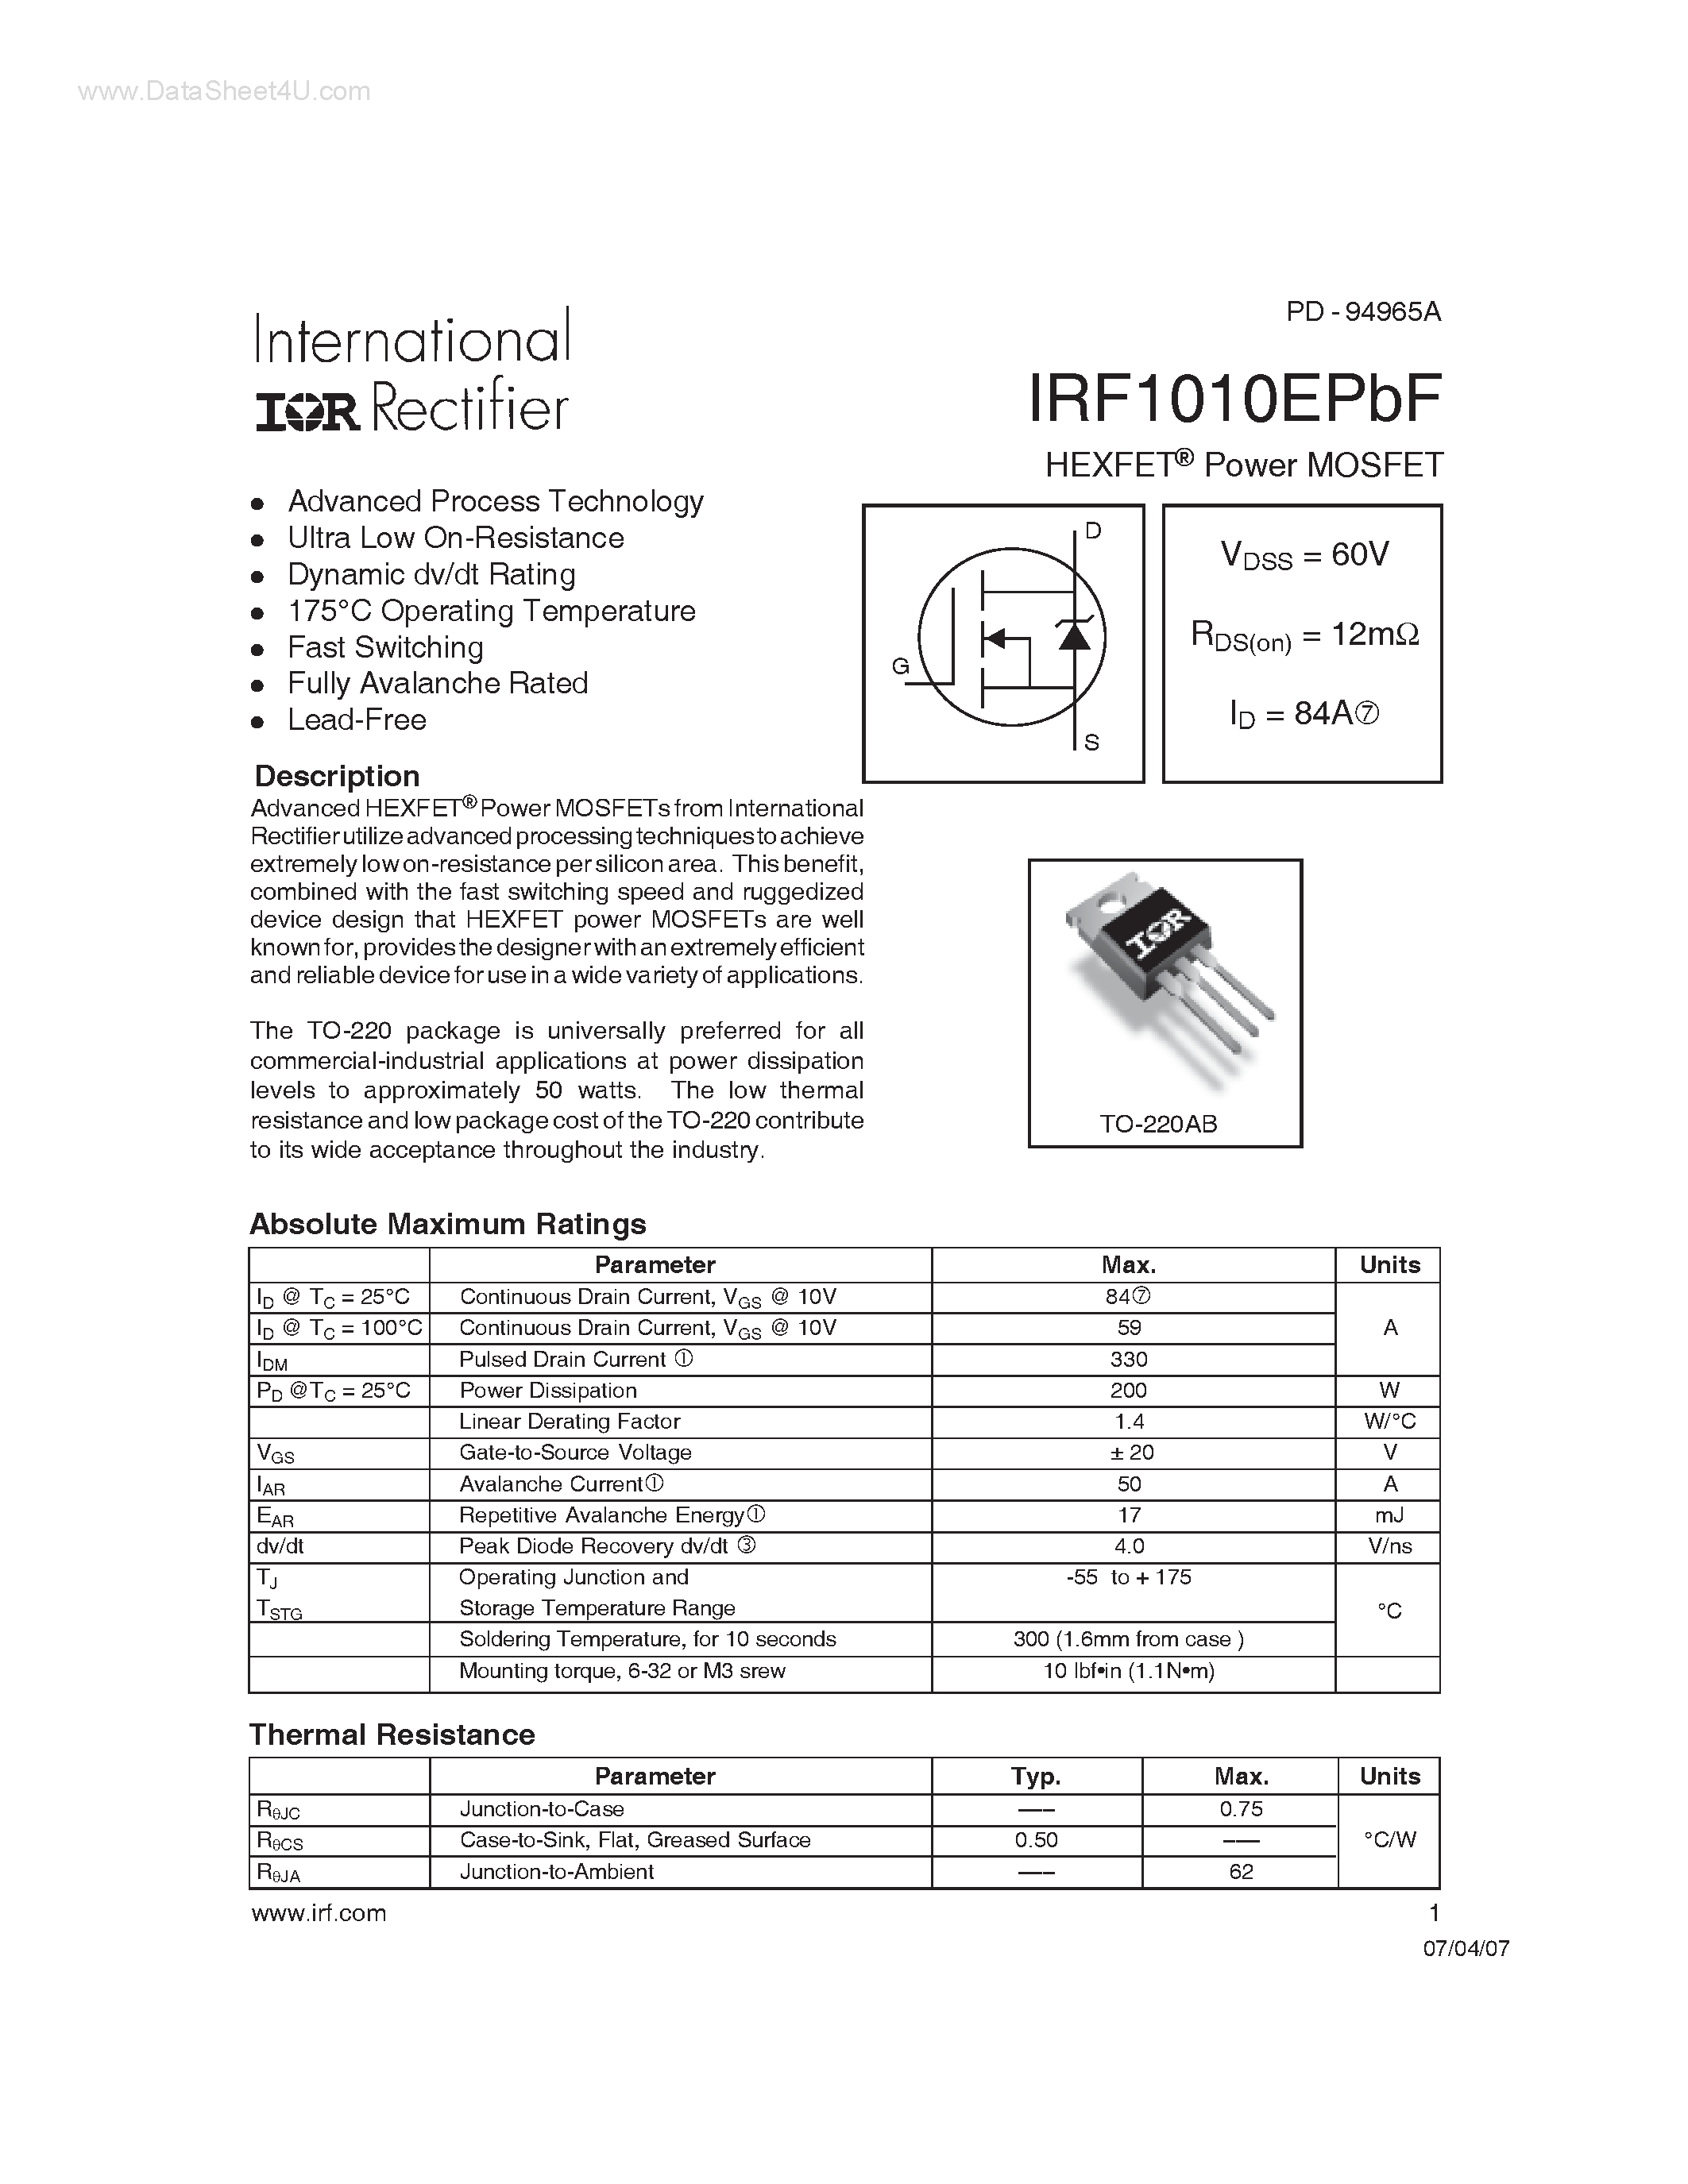 Datasheet IRF1010EPBF - Power MOSFET page 1